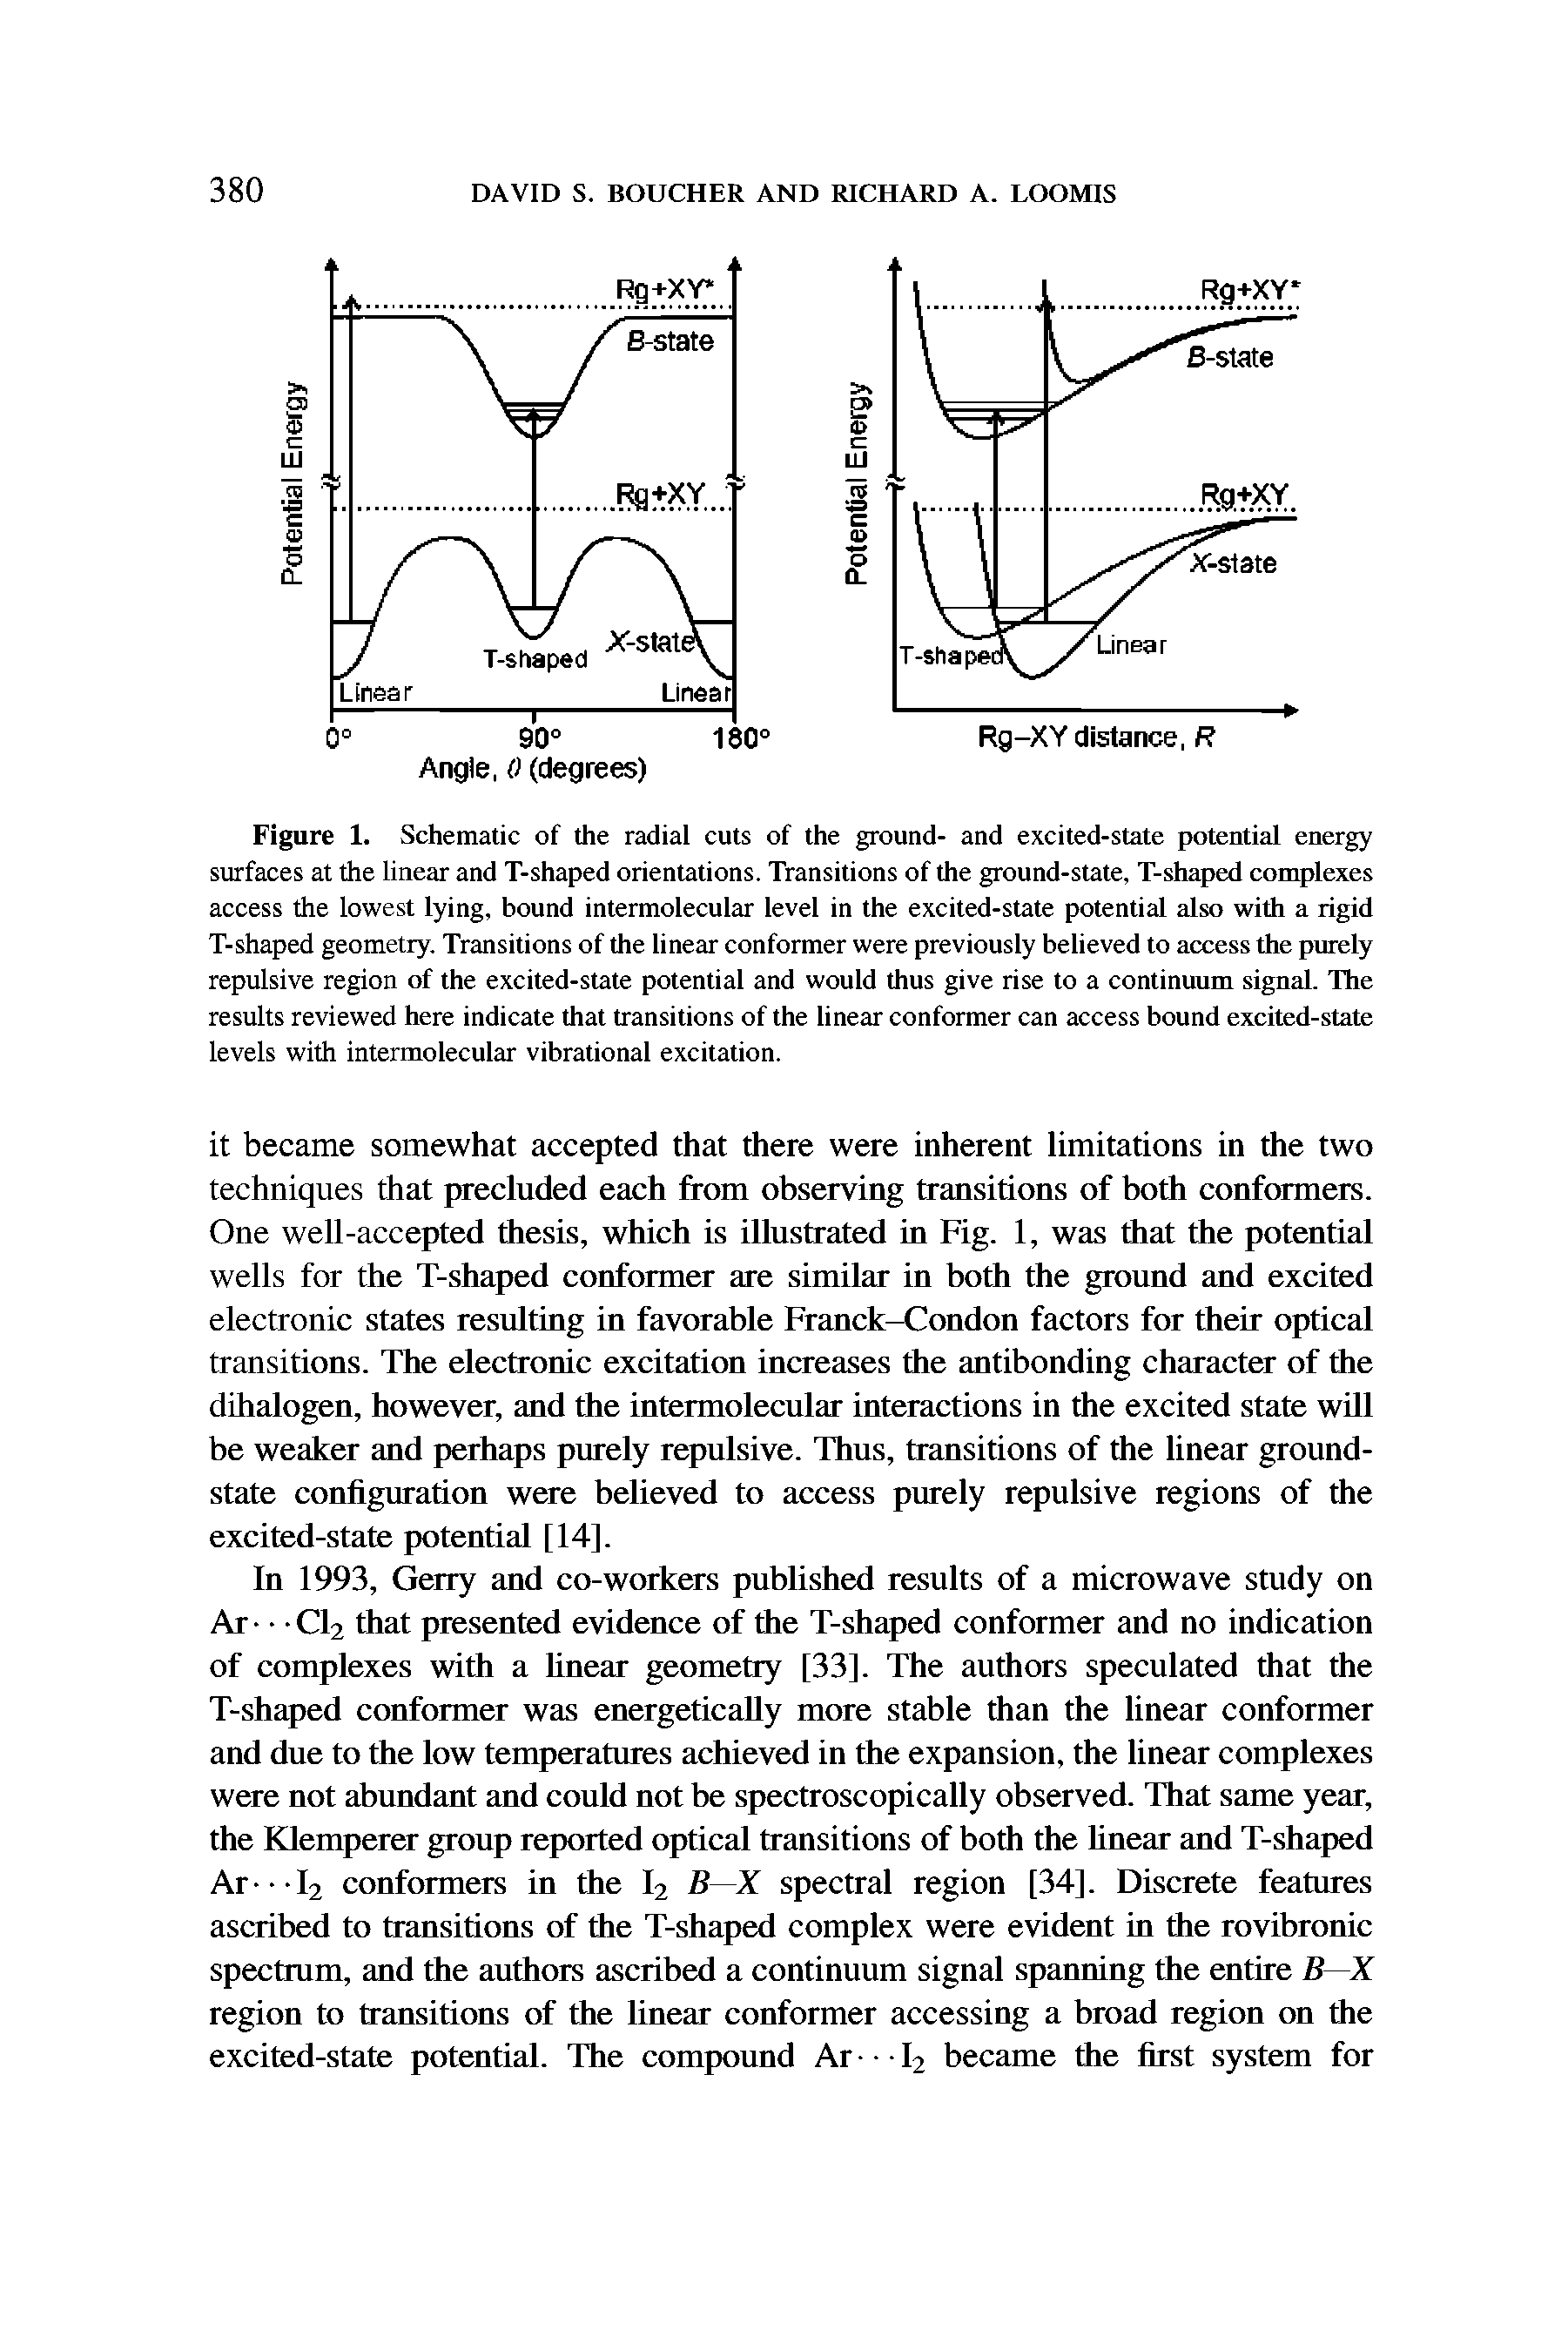 Figure 1. Schematic of the radial cuts of the ground- and excited-state potential energy surfaces at the linear and T-shaped orientations. Transitions of the ground-state, T-shaped complexes access the lowest lying, bound intermolecular level in the excited-state potential also with a rigid T-shaped geometry. Transitions of the linear conformer were previously believed to access the purely repulsive region of the excited-state potential and would thus give rise to a continuum signal. The results reviewed here indicate that transitions of the linear conformer can access bound excited-state levels with intermolecular vibrational excitation.